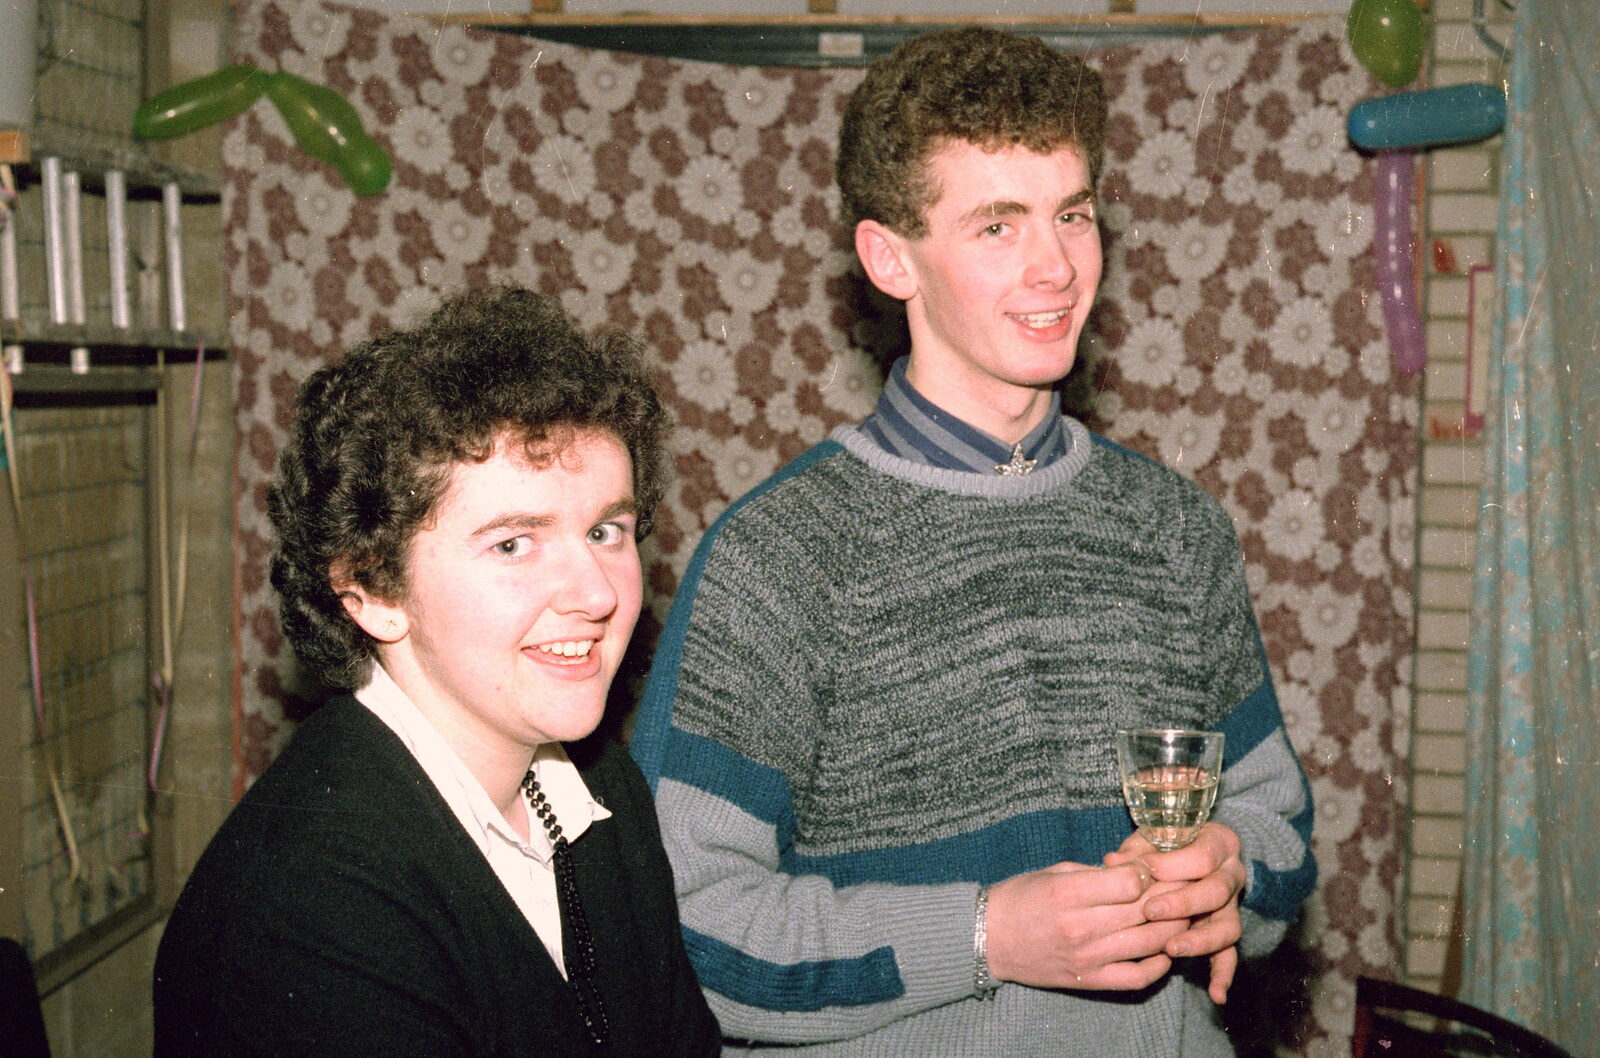 Liz and fellow Brock college dude from New Year's Eve at Anna's, Walkford, Dorset - 31st December 1985